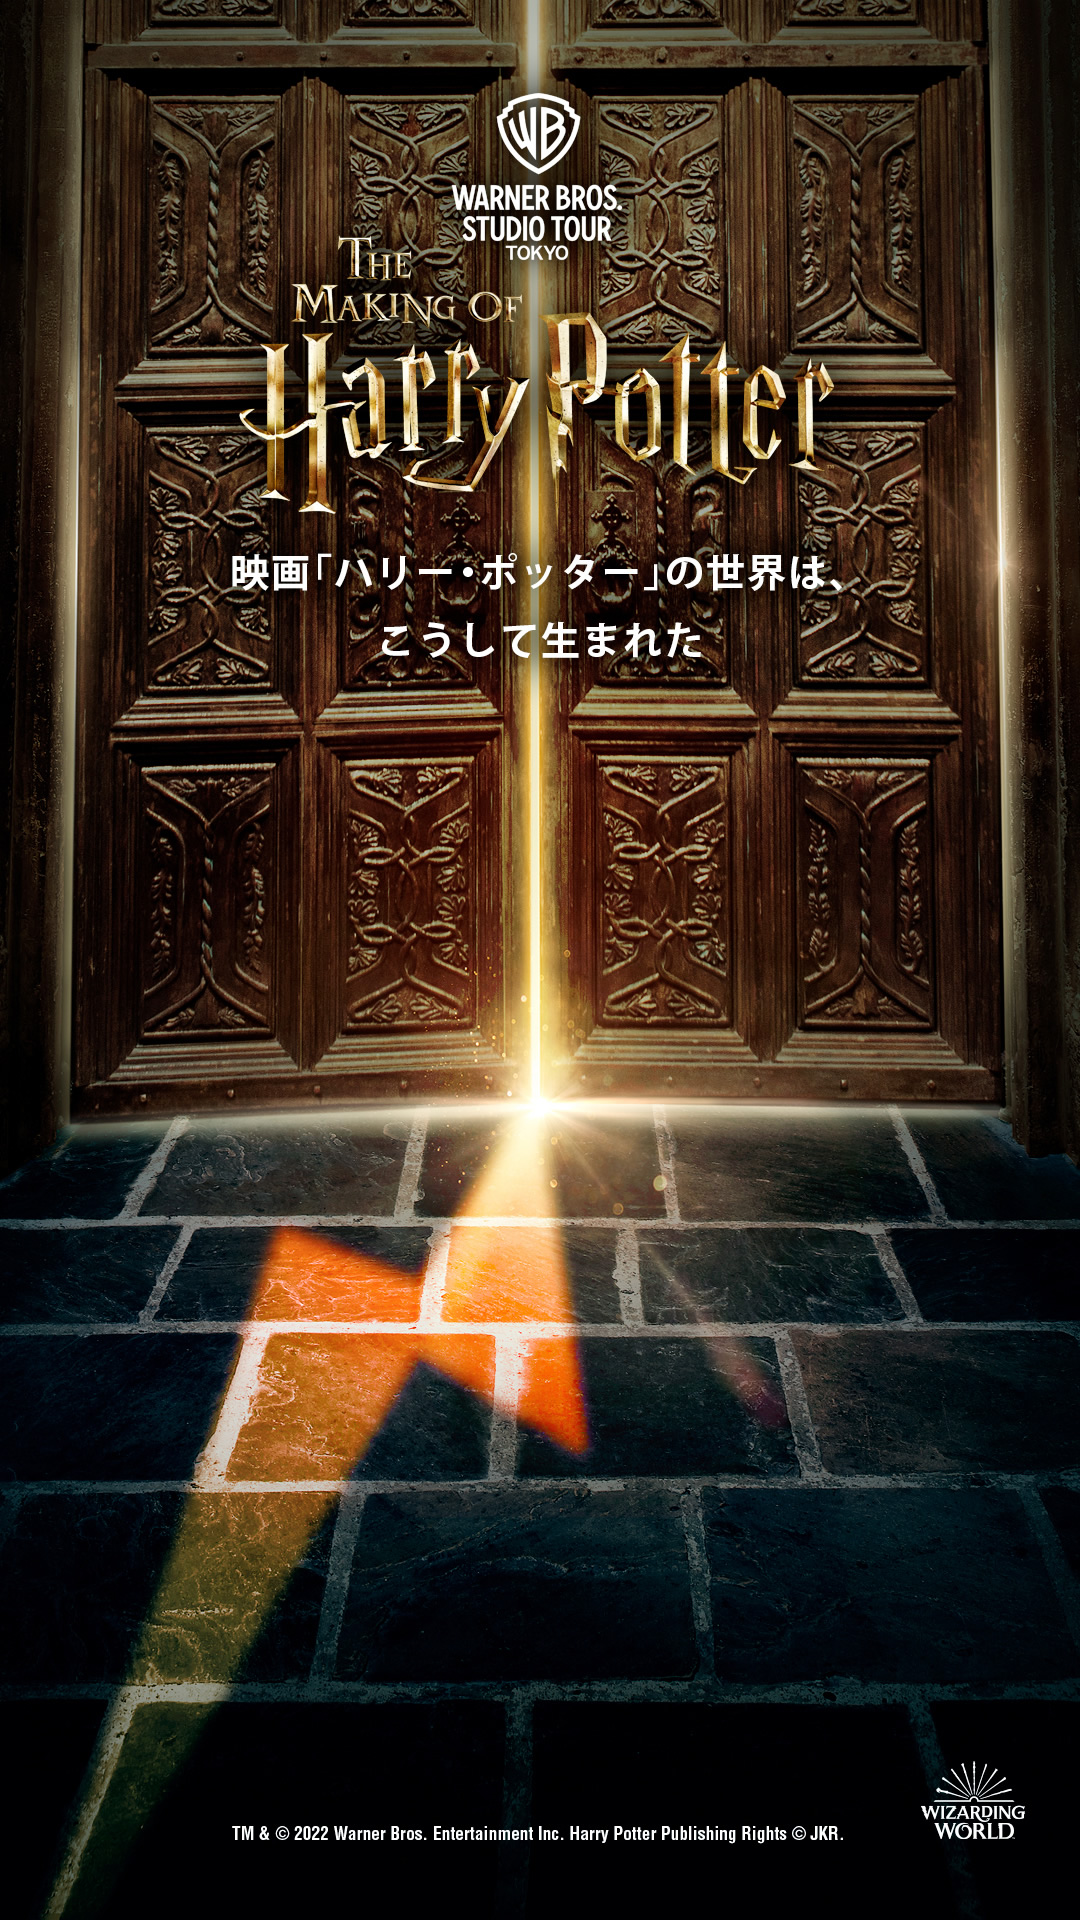 Concept art Harry Potter Studio Tour Tokyo will open in summer 2023! Warner Bros Studio Tour Tokyo - Making of Harry Potter opens at the former Toshimaen site!